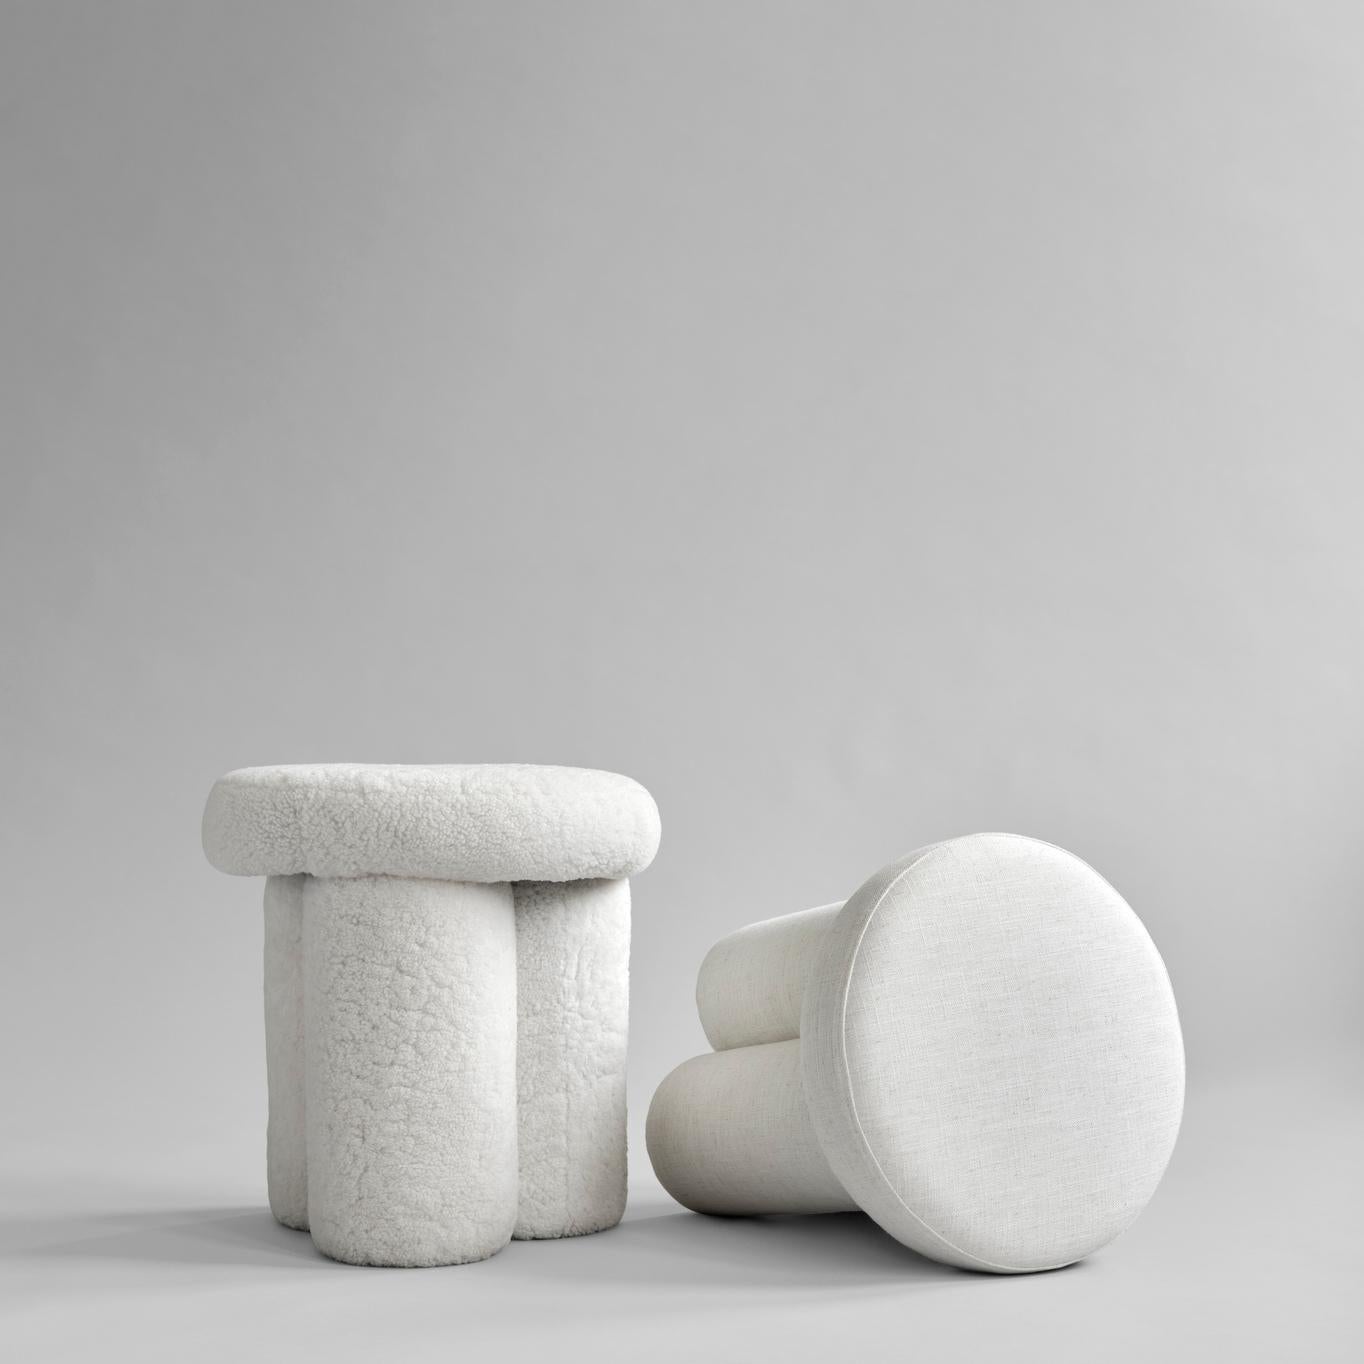 Sheepskin big foot stool by 101 Copenhagen.
Designed by Kristian Sofus Hansen & Tommy Hyldahl.
Dimensions: L38 / W38 /H43 cm.
Materials: Sheepskin

A quirky and contemporary addition to any interior setting and family alike, the Big Foot Stool